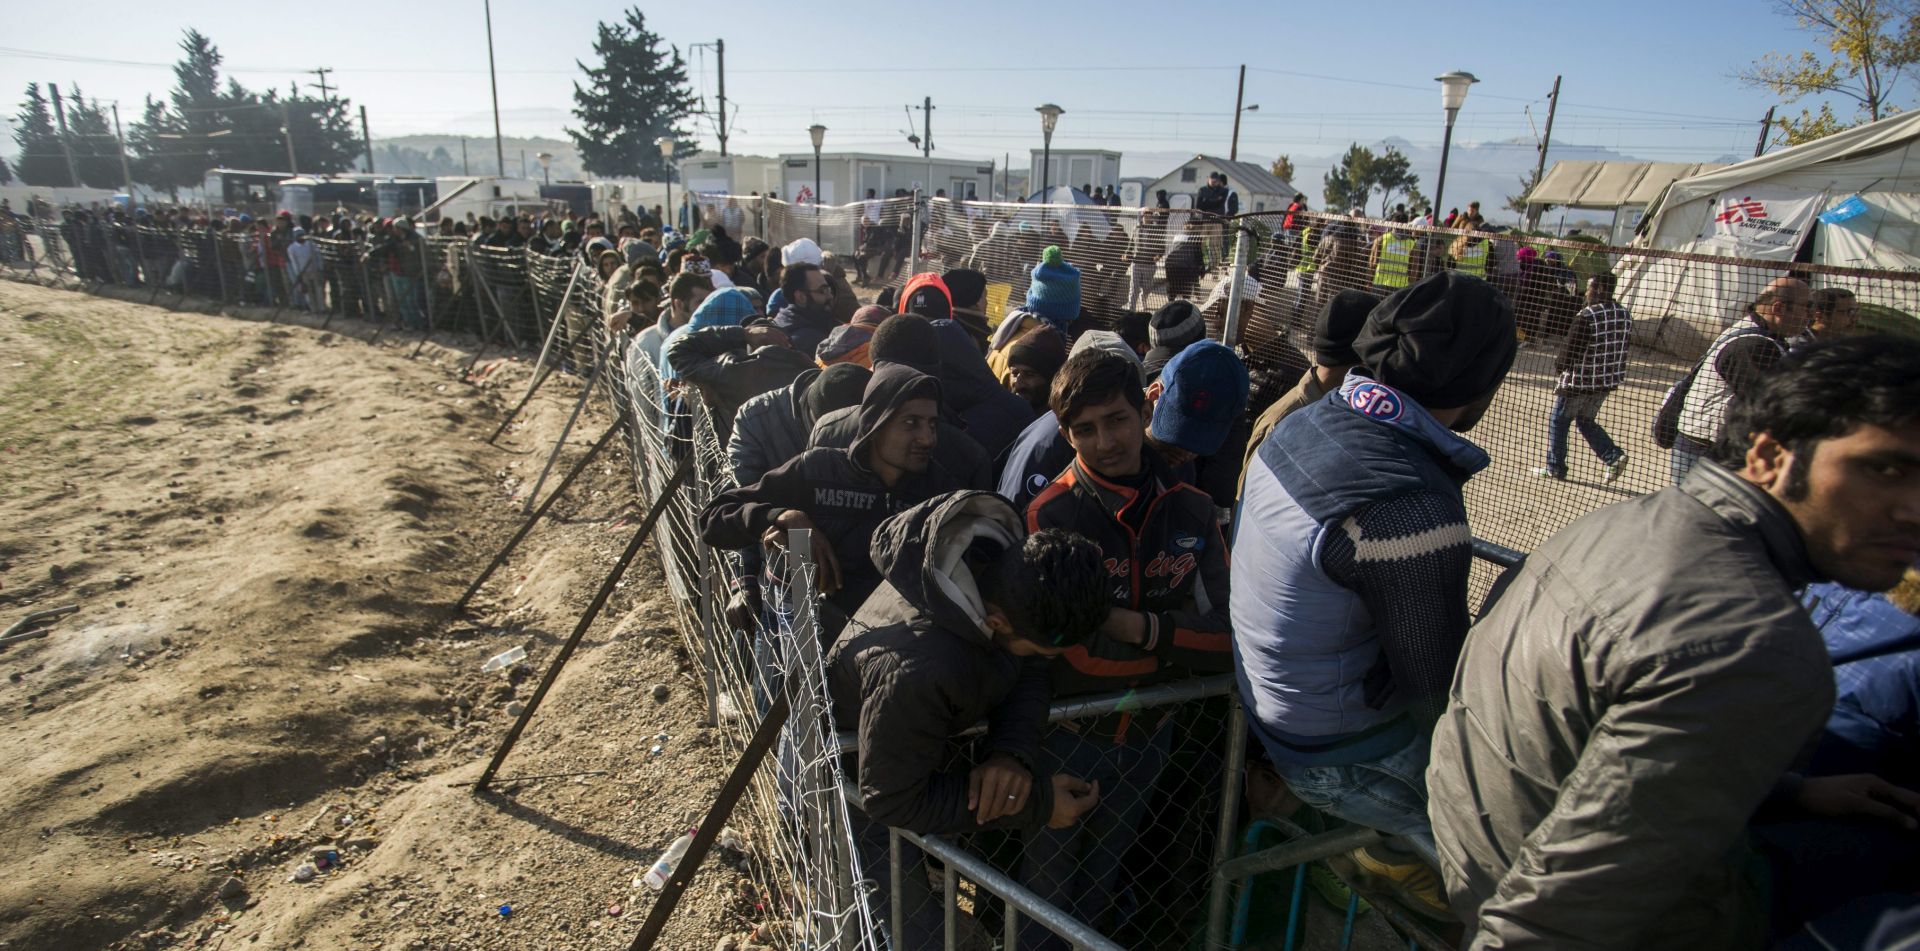 epa05058785 Migrants stand in line for food on the Greek side of the border between Greece and Macedonia, near the Greek village of Idomeni, 07 December 2015. Since October, the number of people travelling through the Balkans and on to Austria and Germany has dropped, after countries on the Balkan route stopped allowing entry to economic migrants and built their own fences.  EPA/ZOLTAN BALOGH HUNGARY OUT